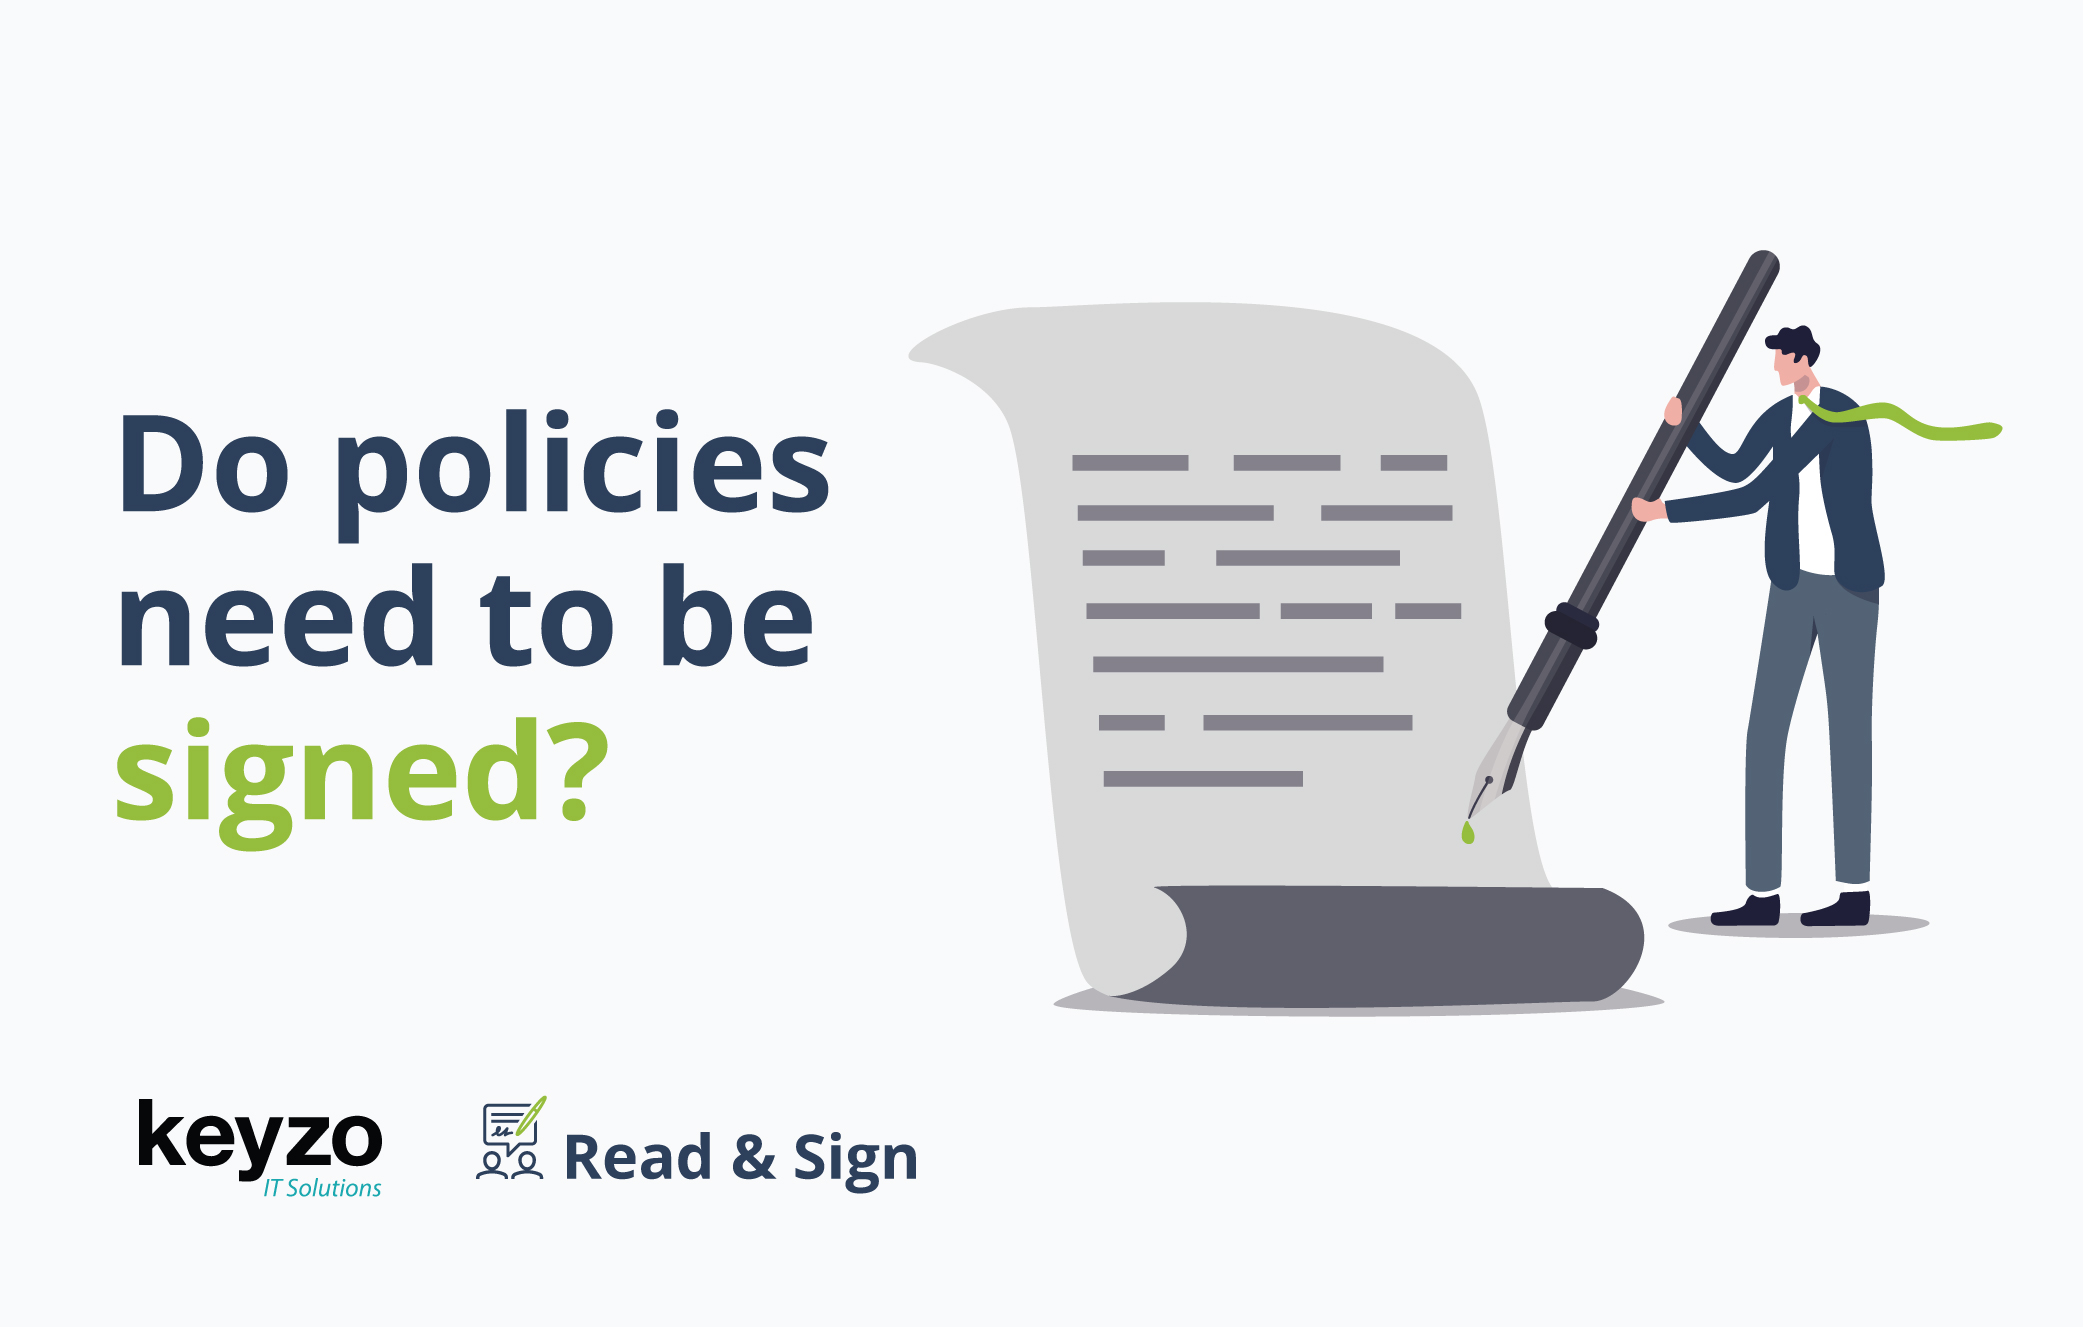 Do policies have to be signed?